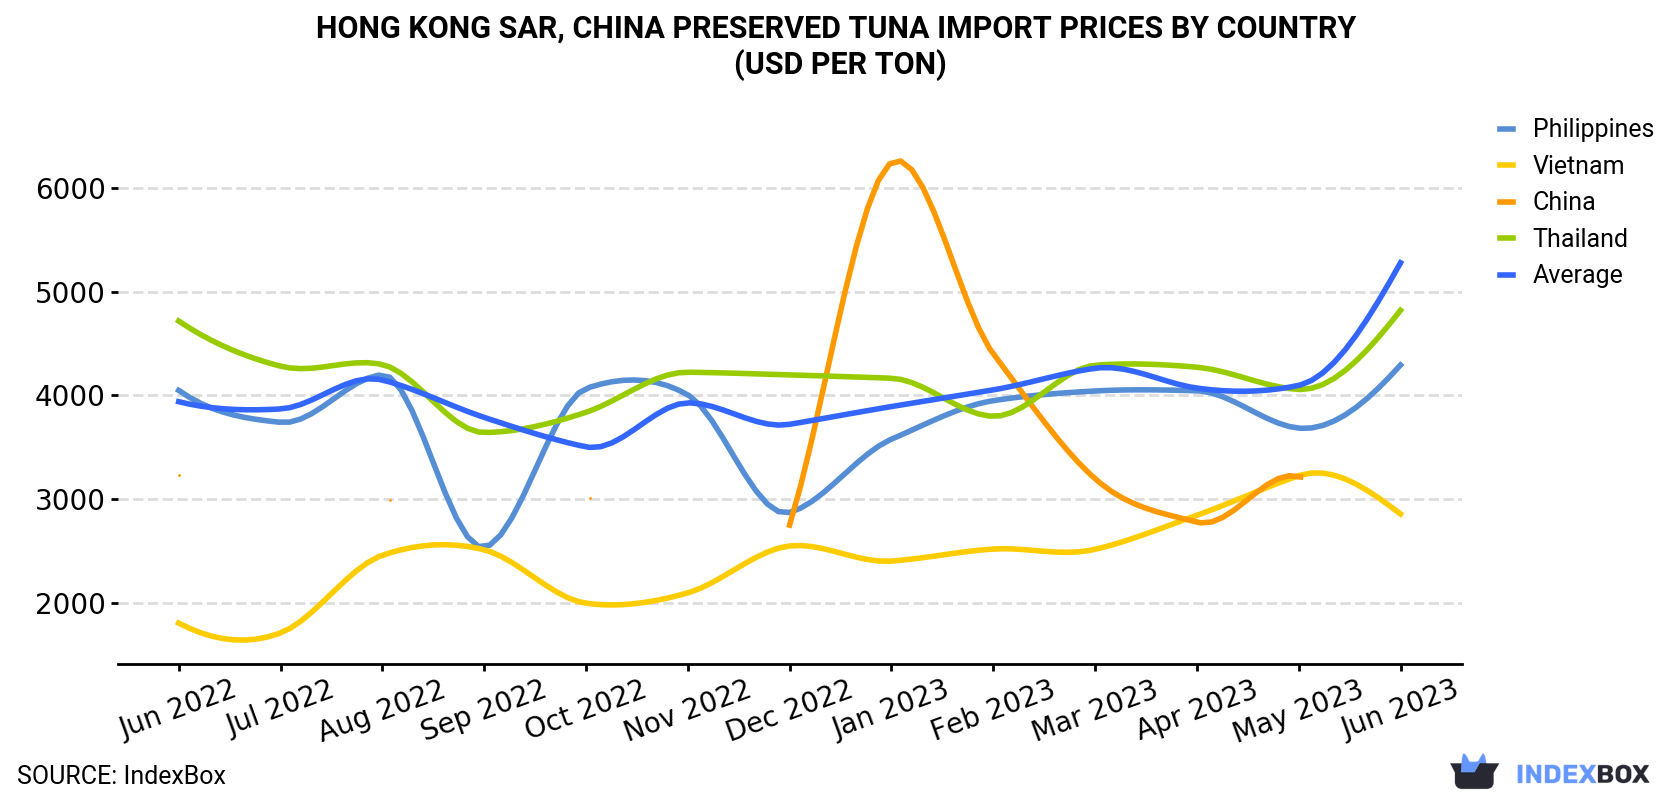 Hong Kong Preserved Tuna Import Prices By Country (USD Per Ton)